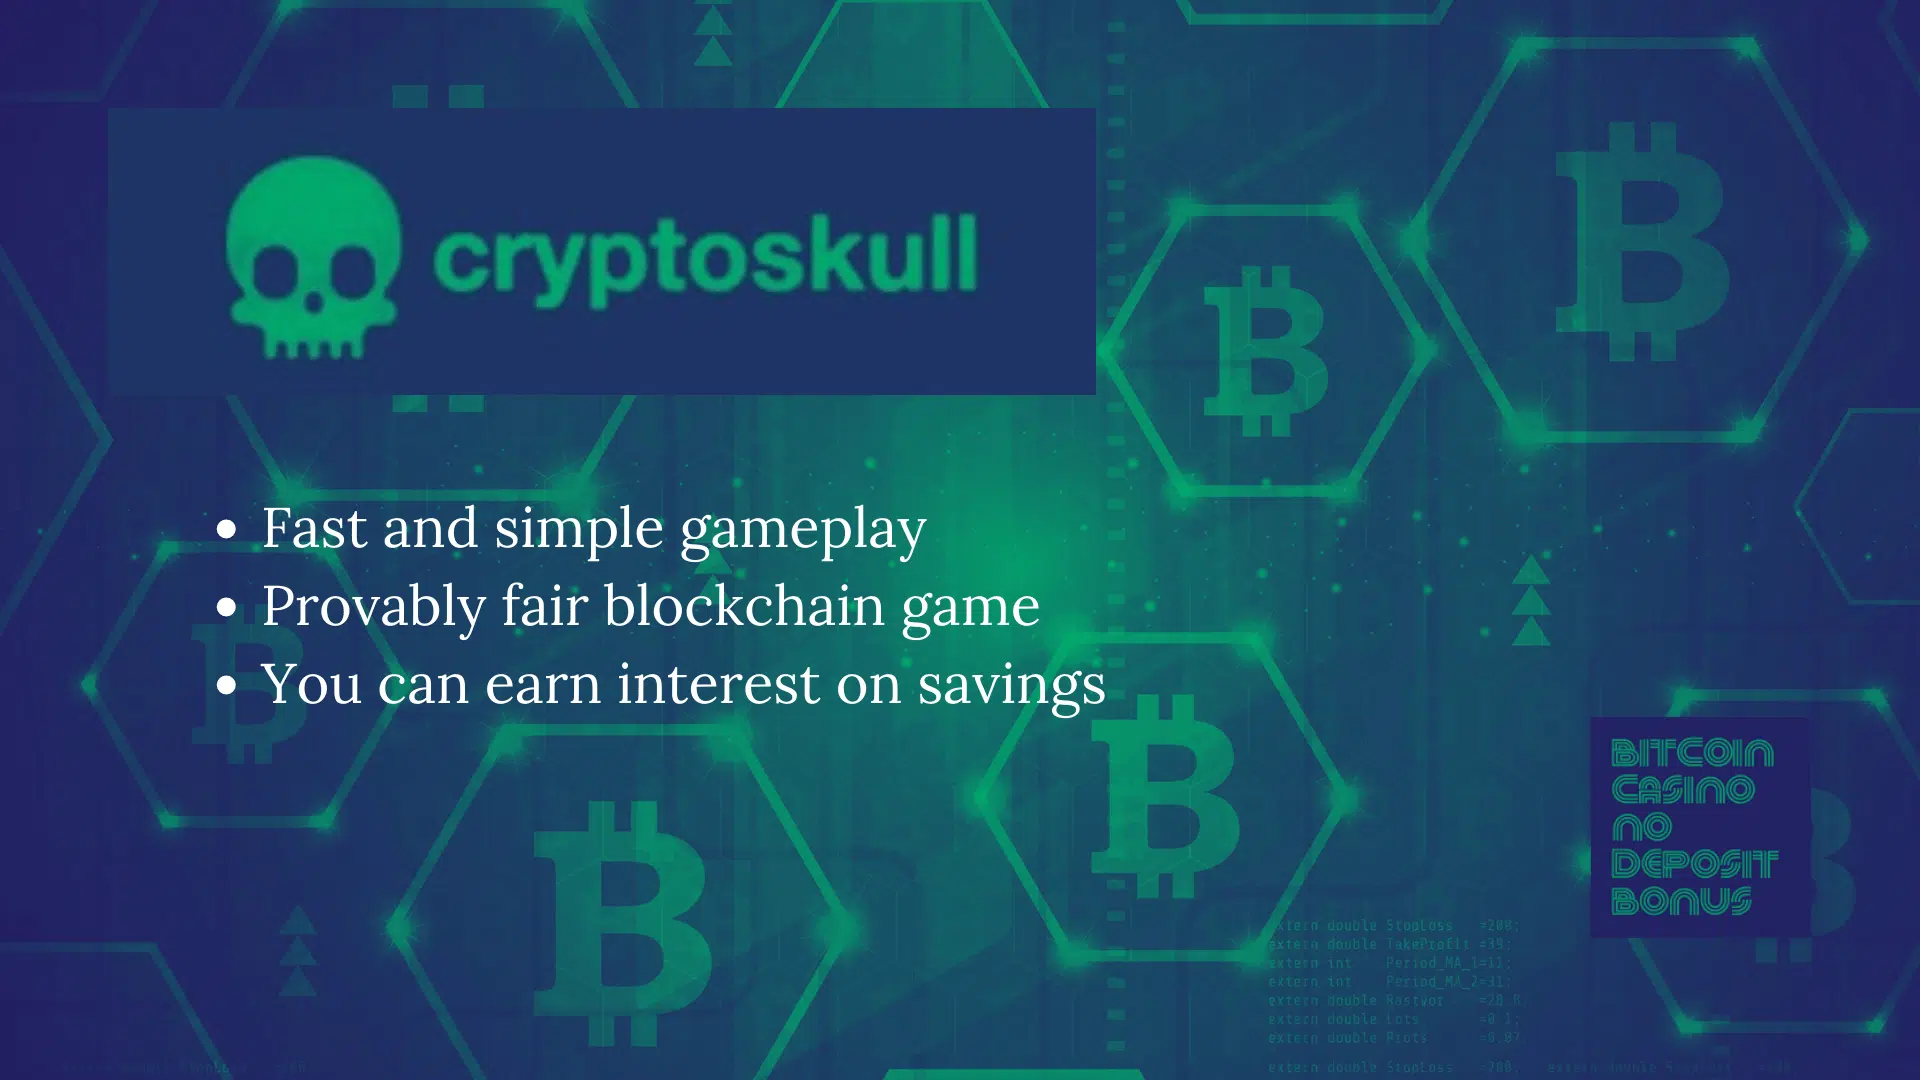 You are currently viewing CryptoSkull Promo Codes – CryptoSkull.com No Deposit Bonus December 2022